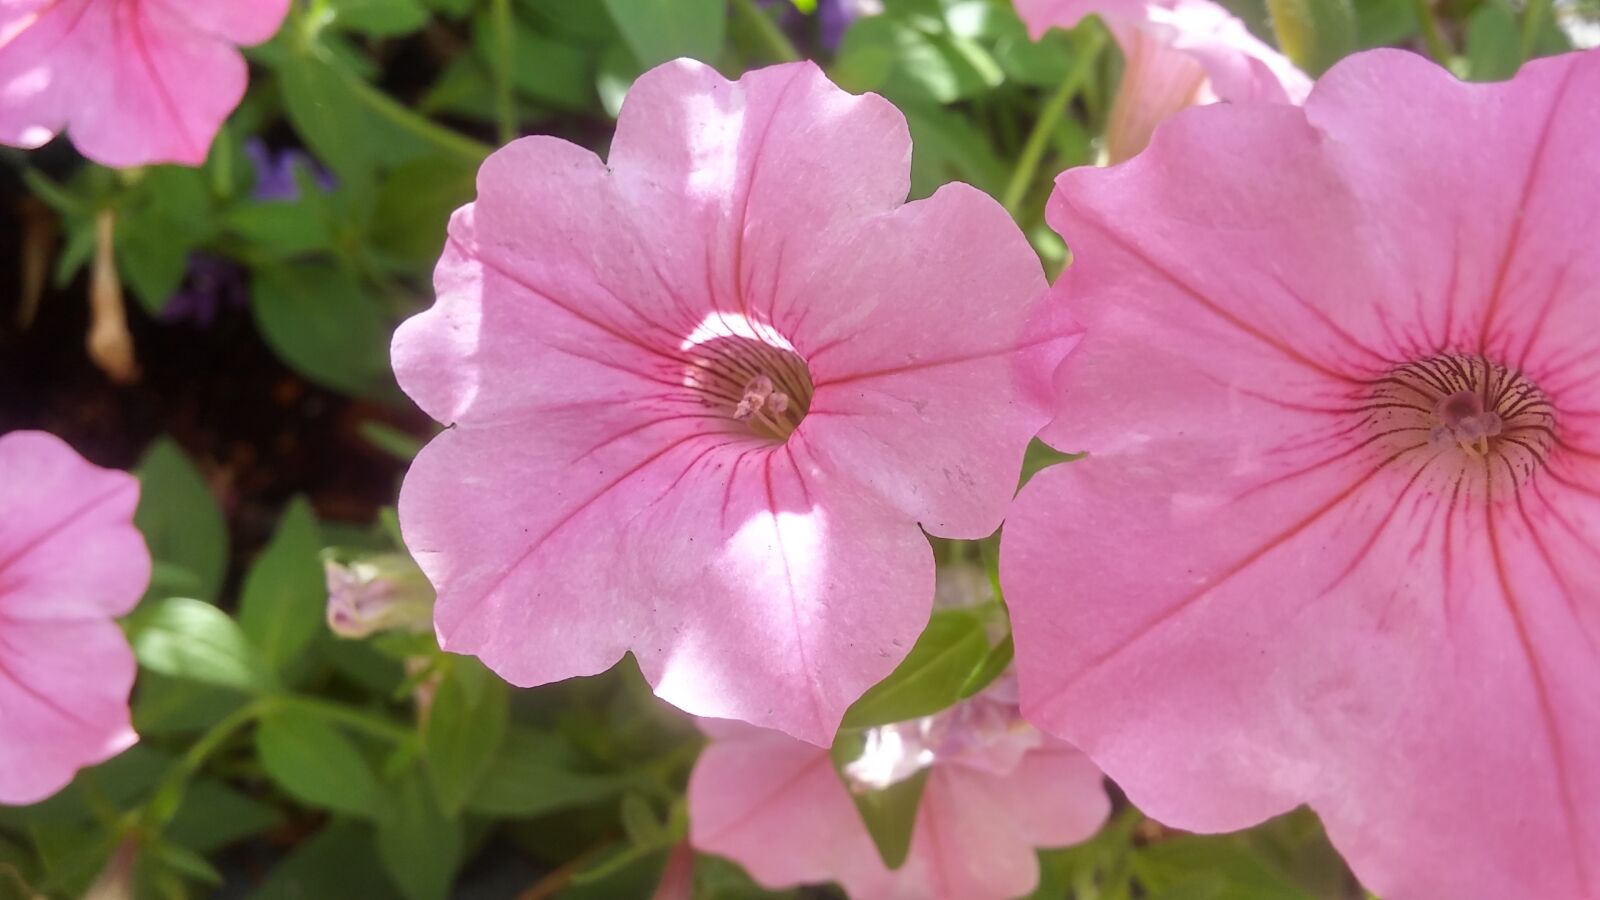 LG G STYLO sample photo. Pink flowers, blossom, simple photography